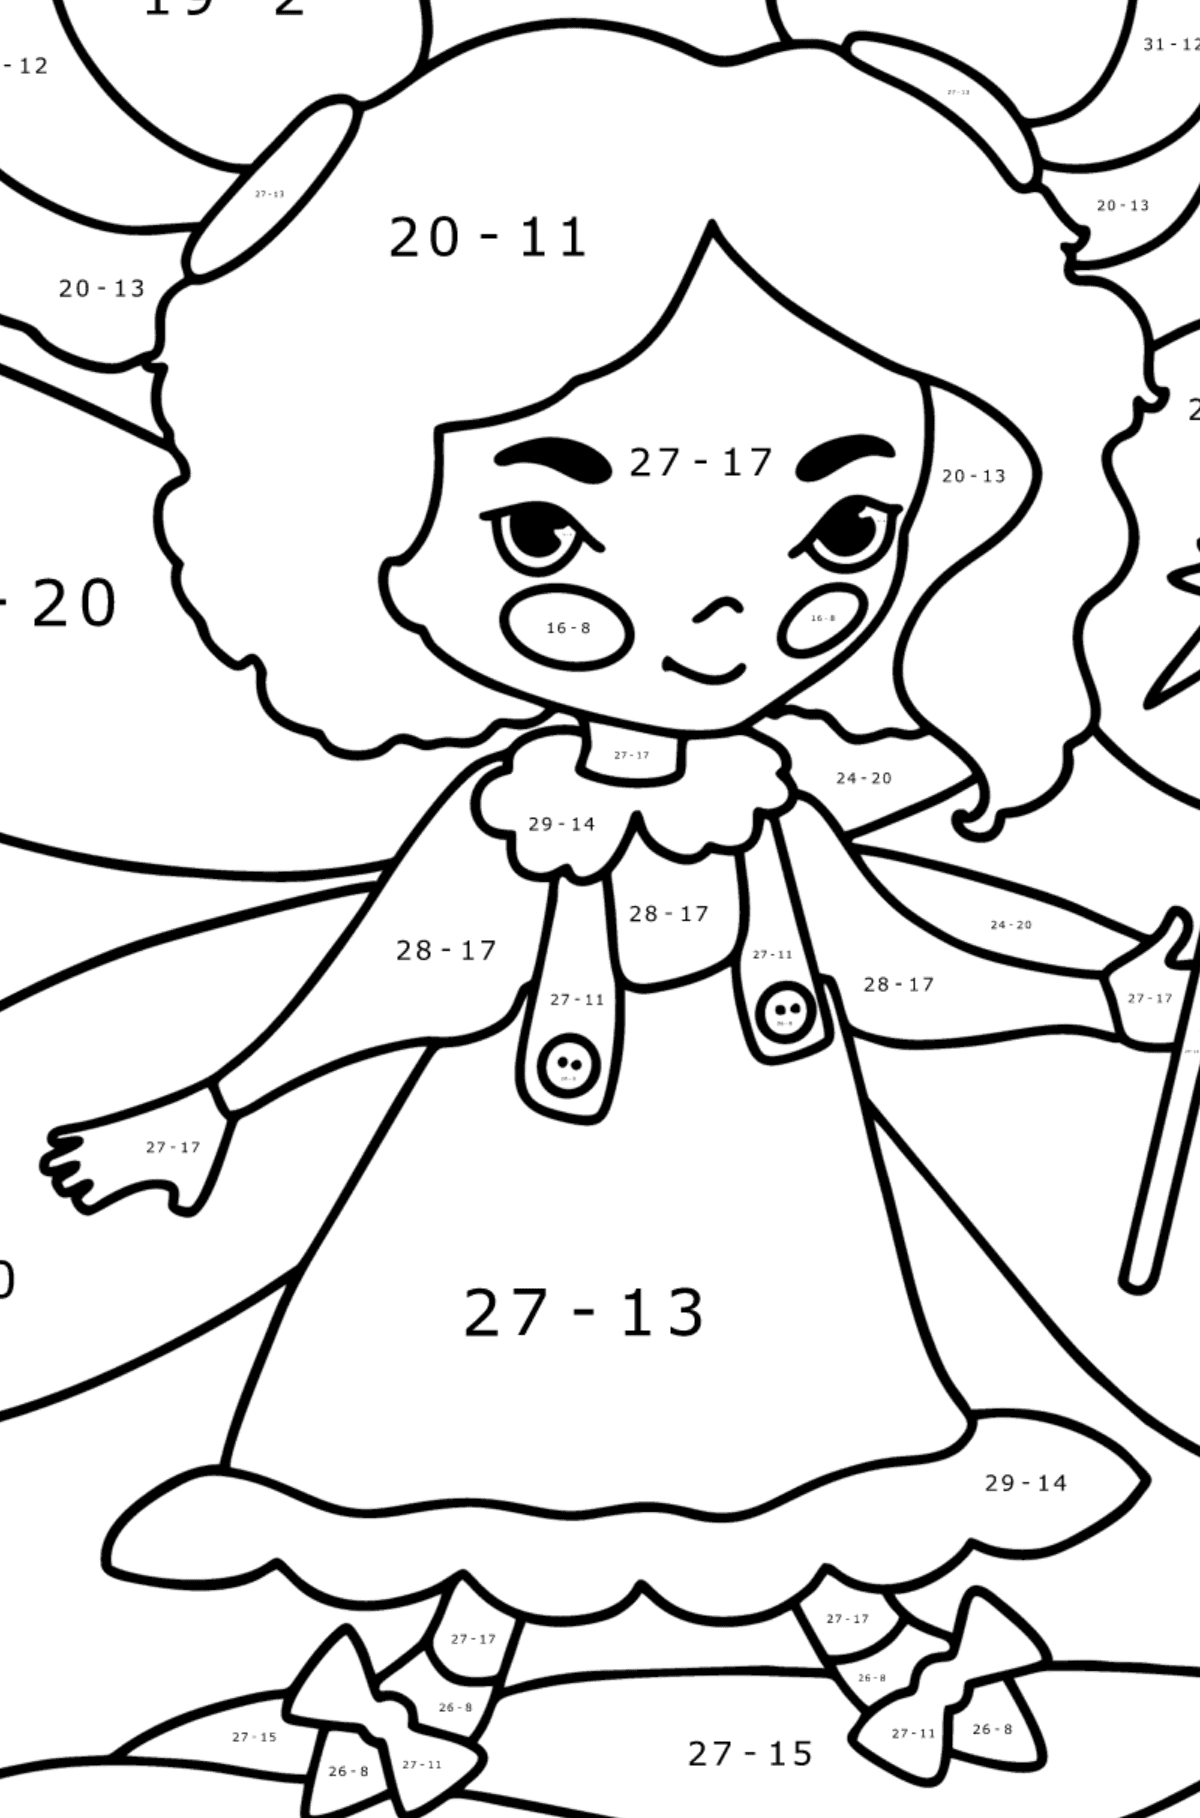 Fairy with a magic wand coloring page - Math Coloring - Subtraction for Kids